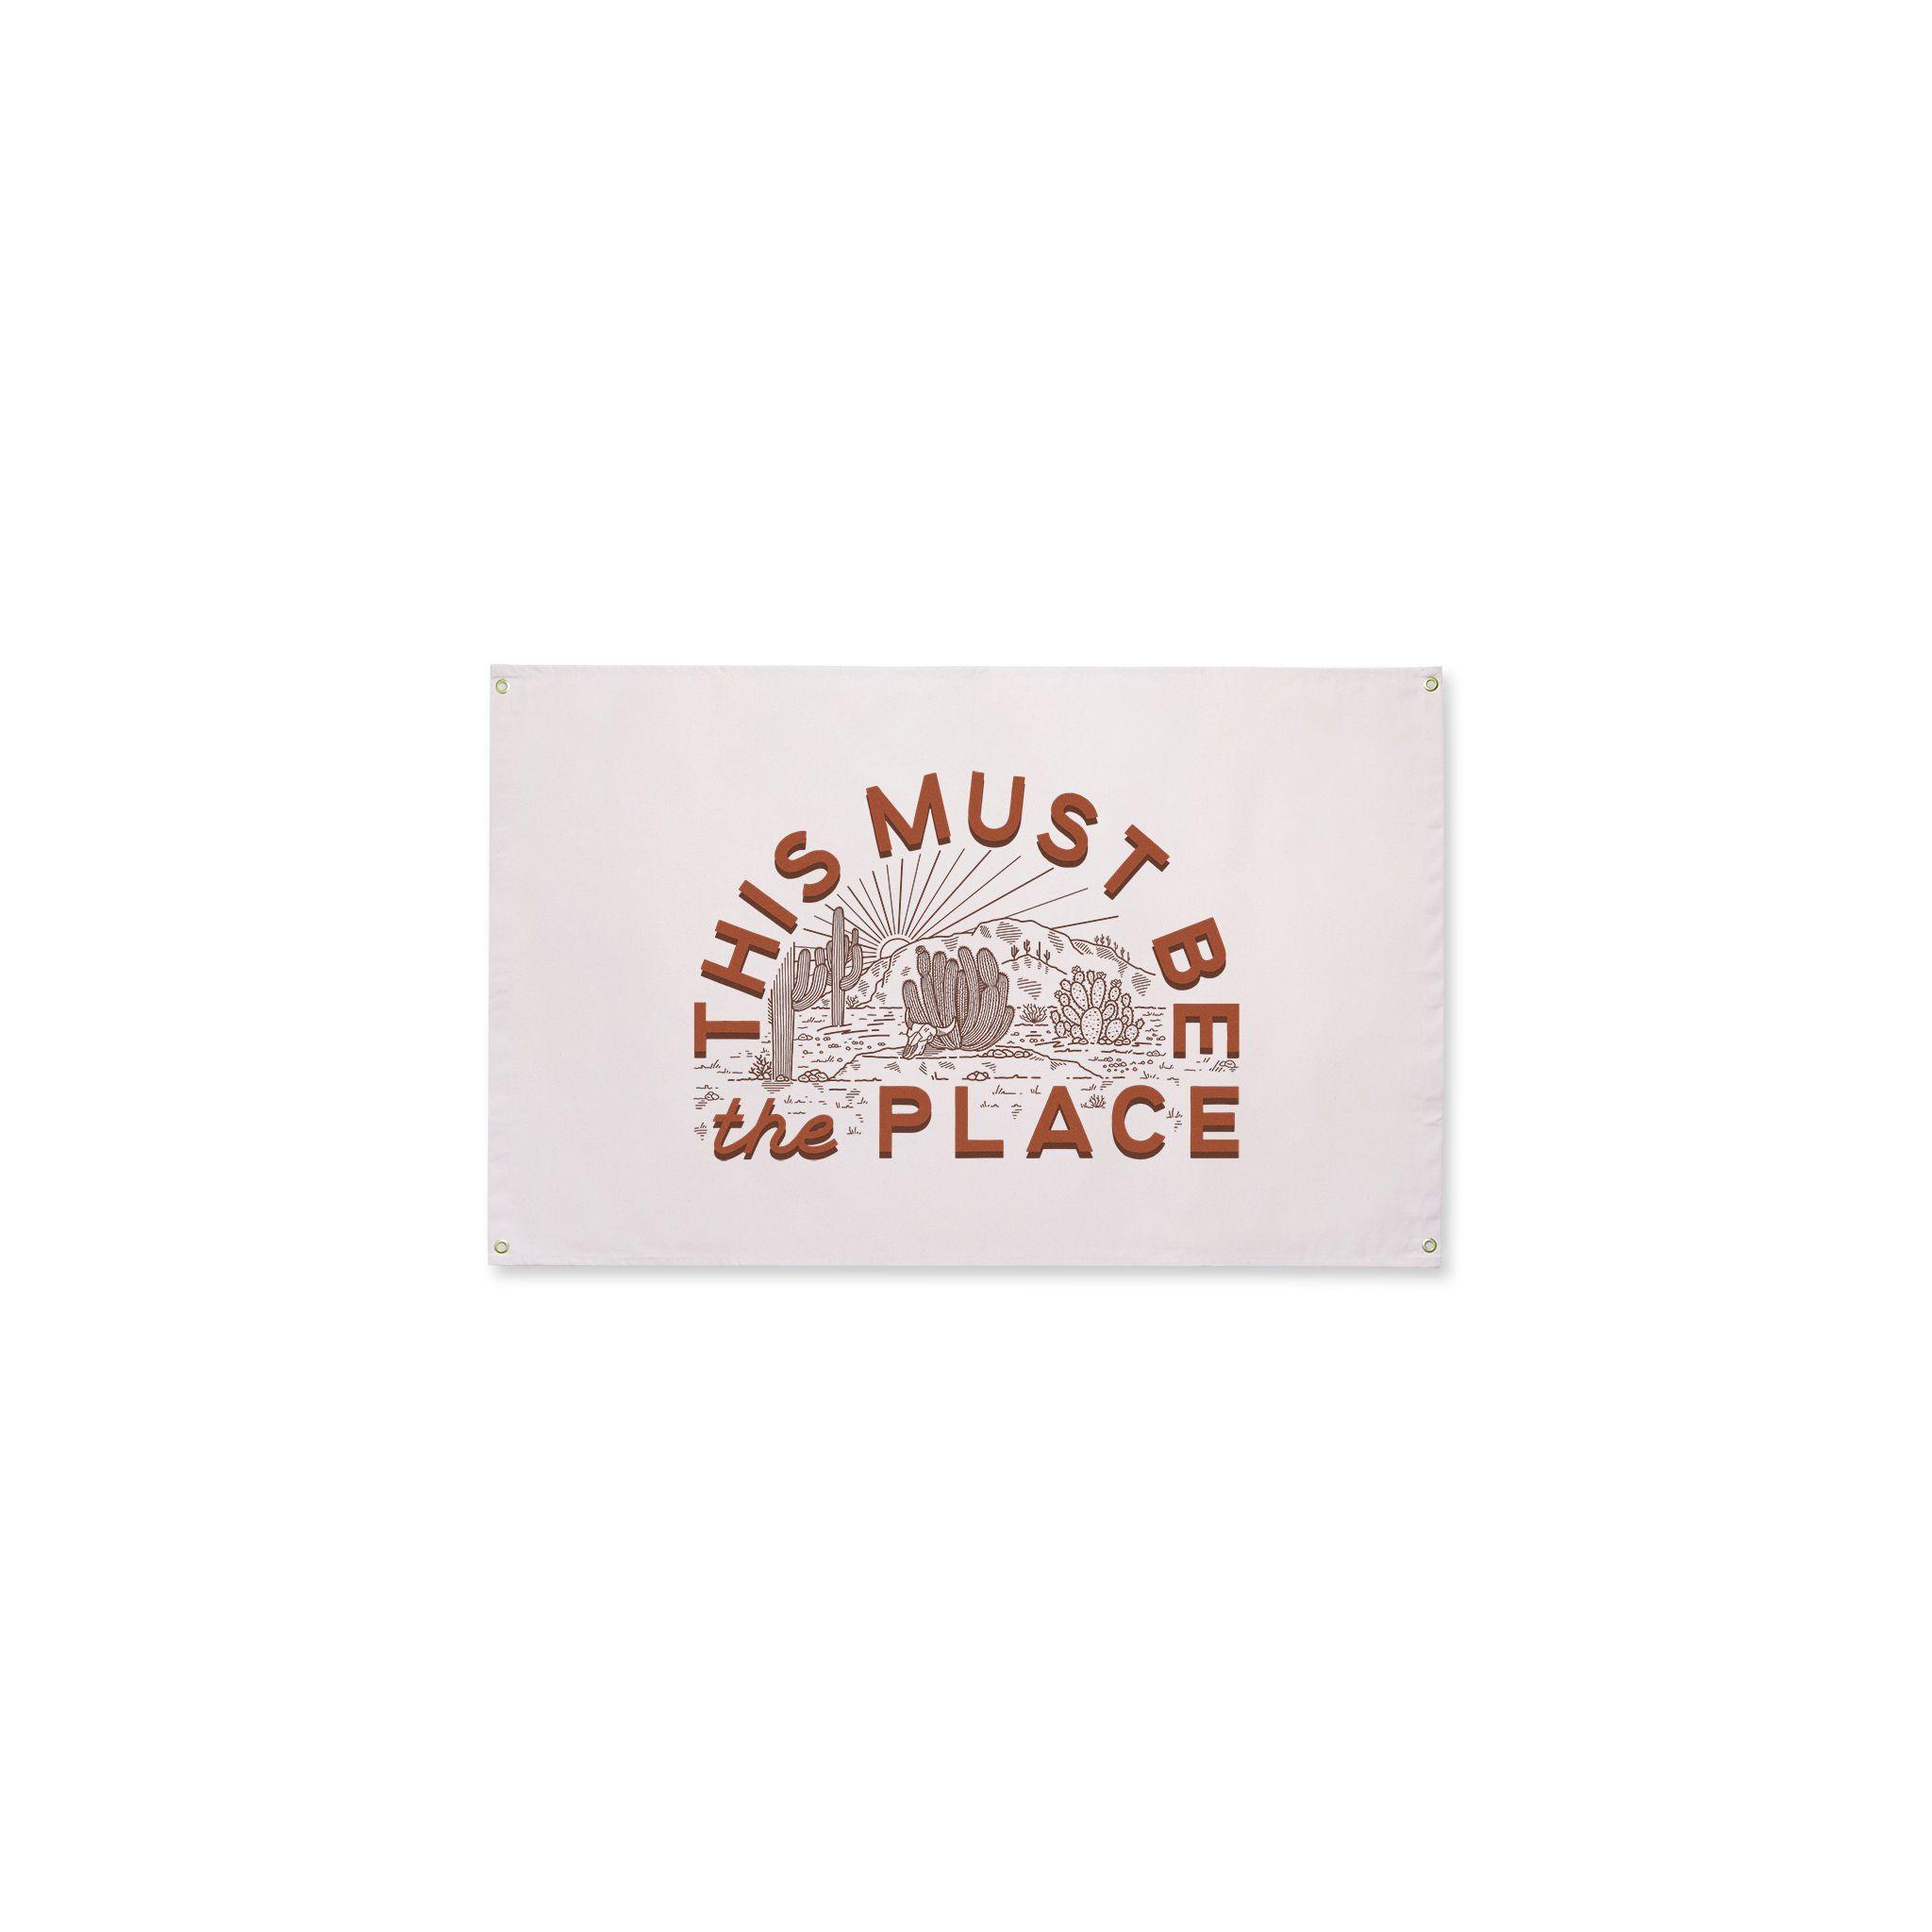 This Must Be The Place Canvas Flag